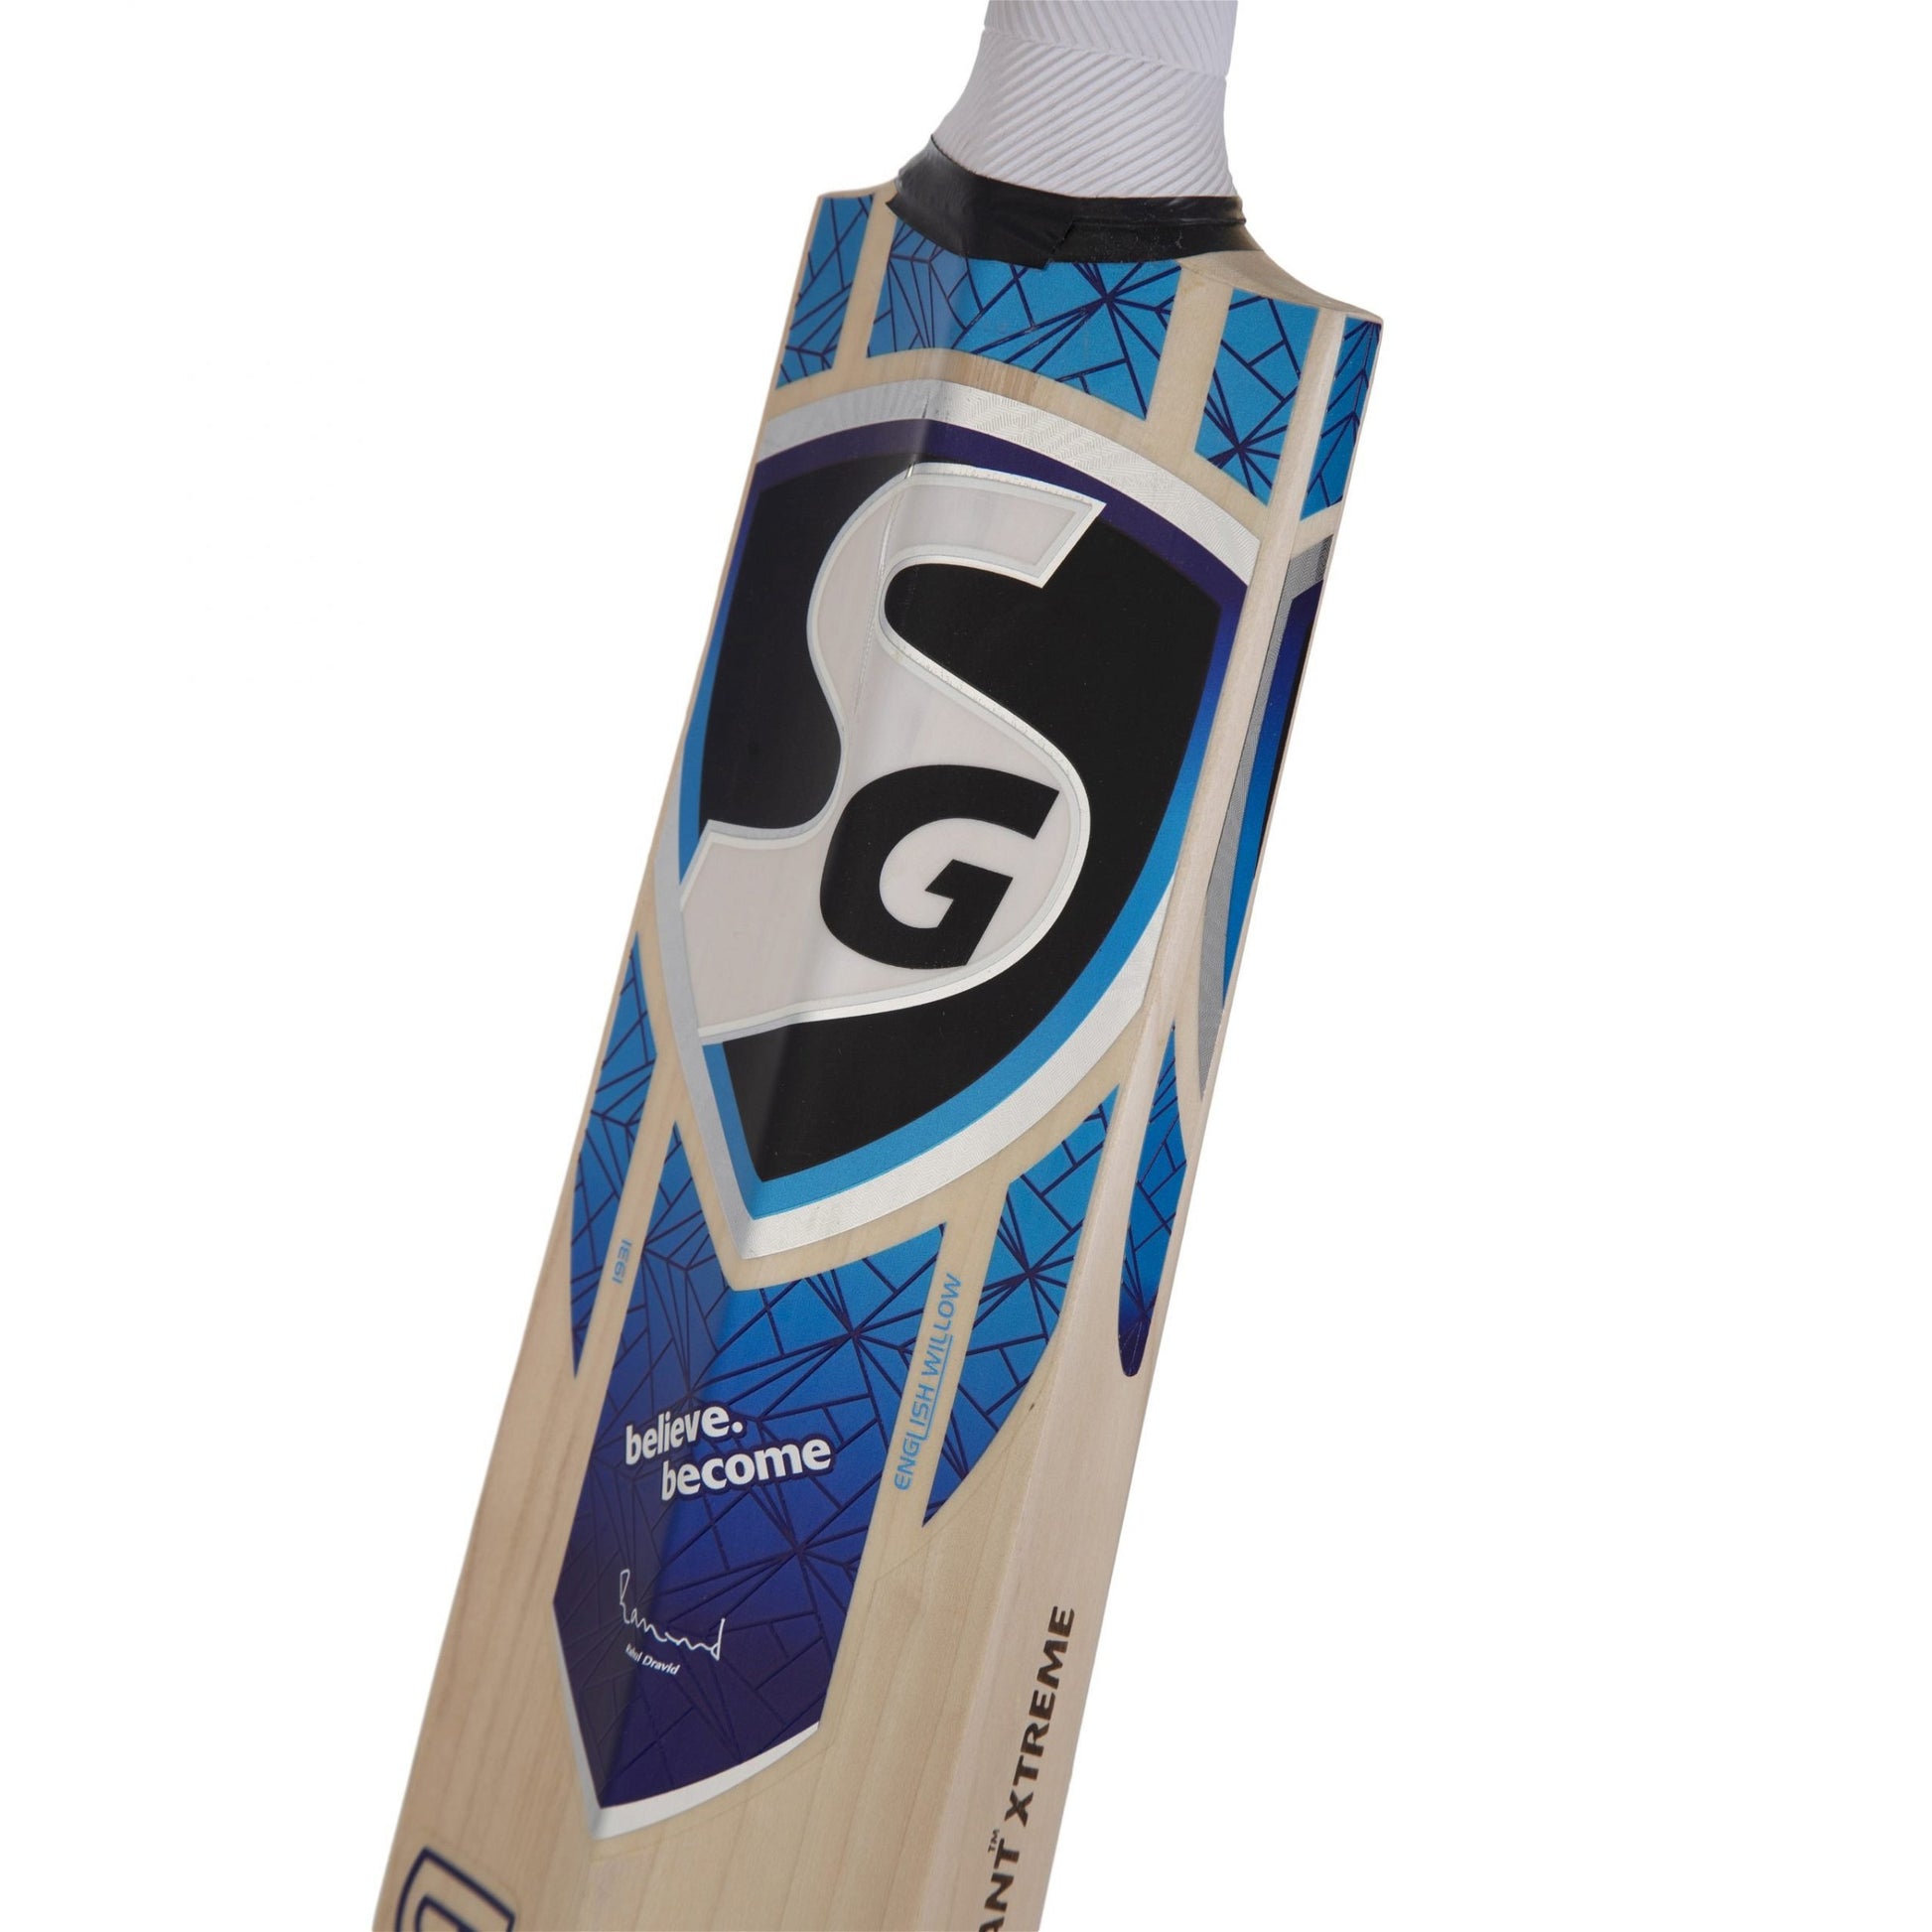 SG Reliant Xtreme Grade 5 English willow hard pressed &amp; traditionally shaped for superb stroke Cricket Bat (Leather Ball)